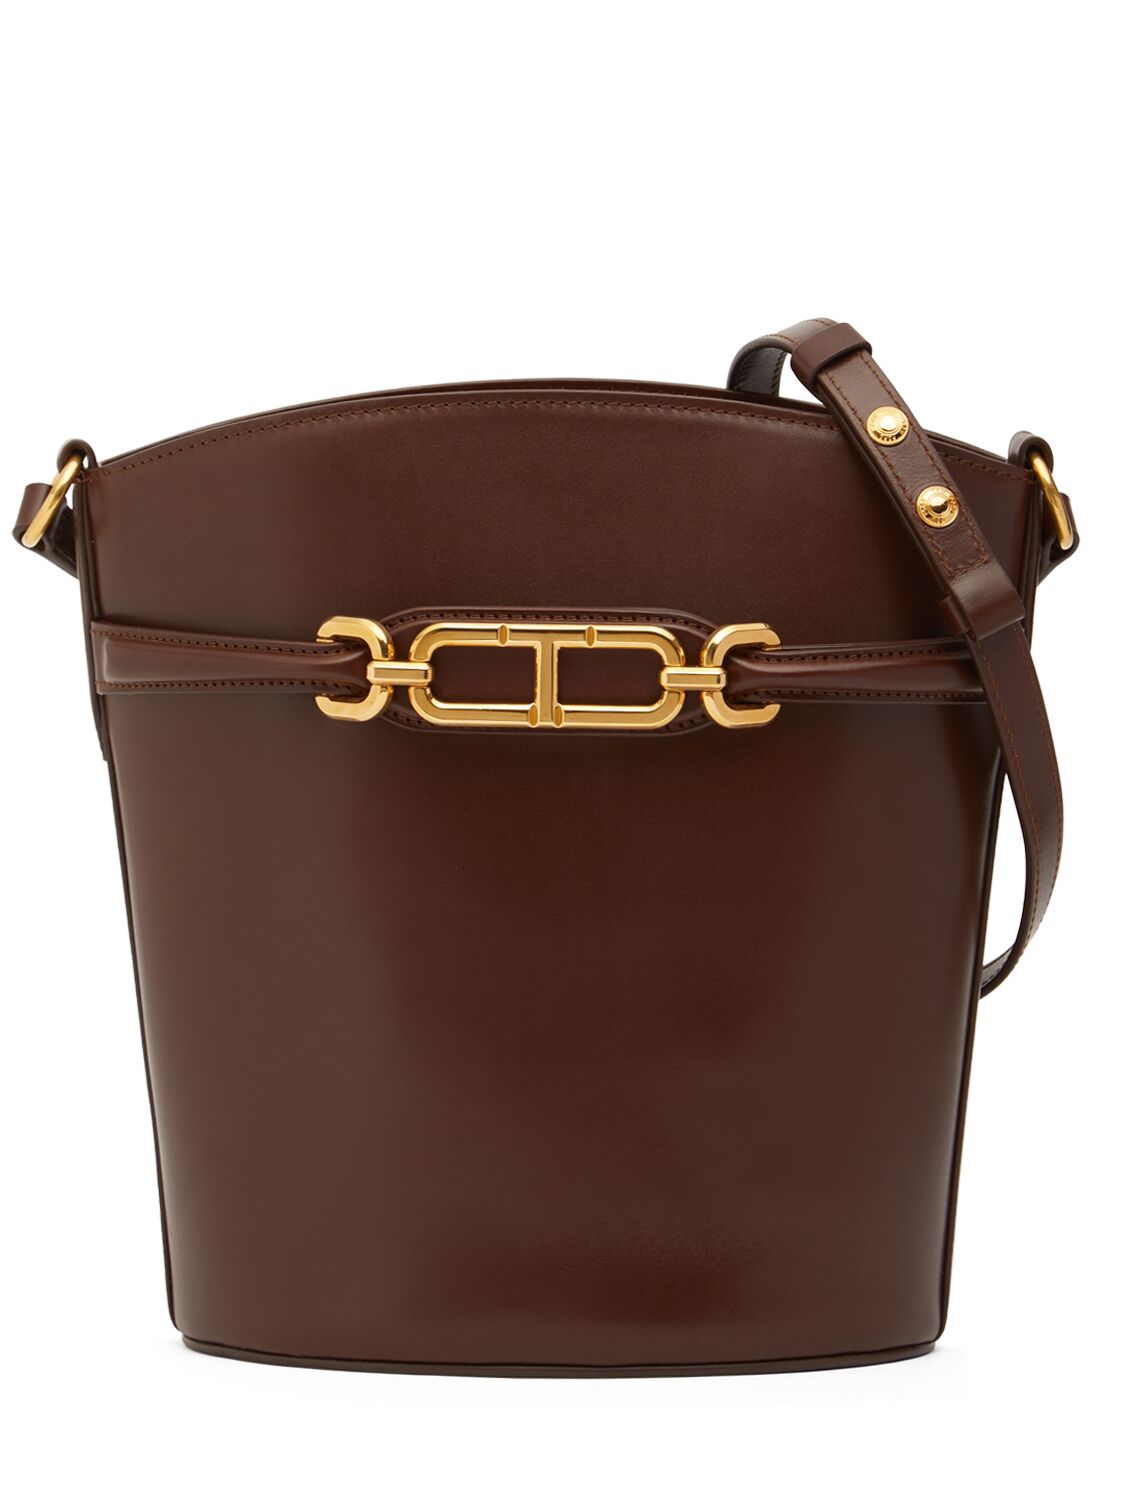 Tom Ford Medium Whitney Box Leather Bucket Bag In Saddle Brown